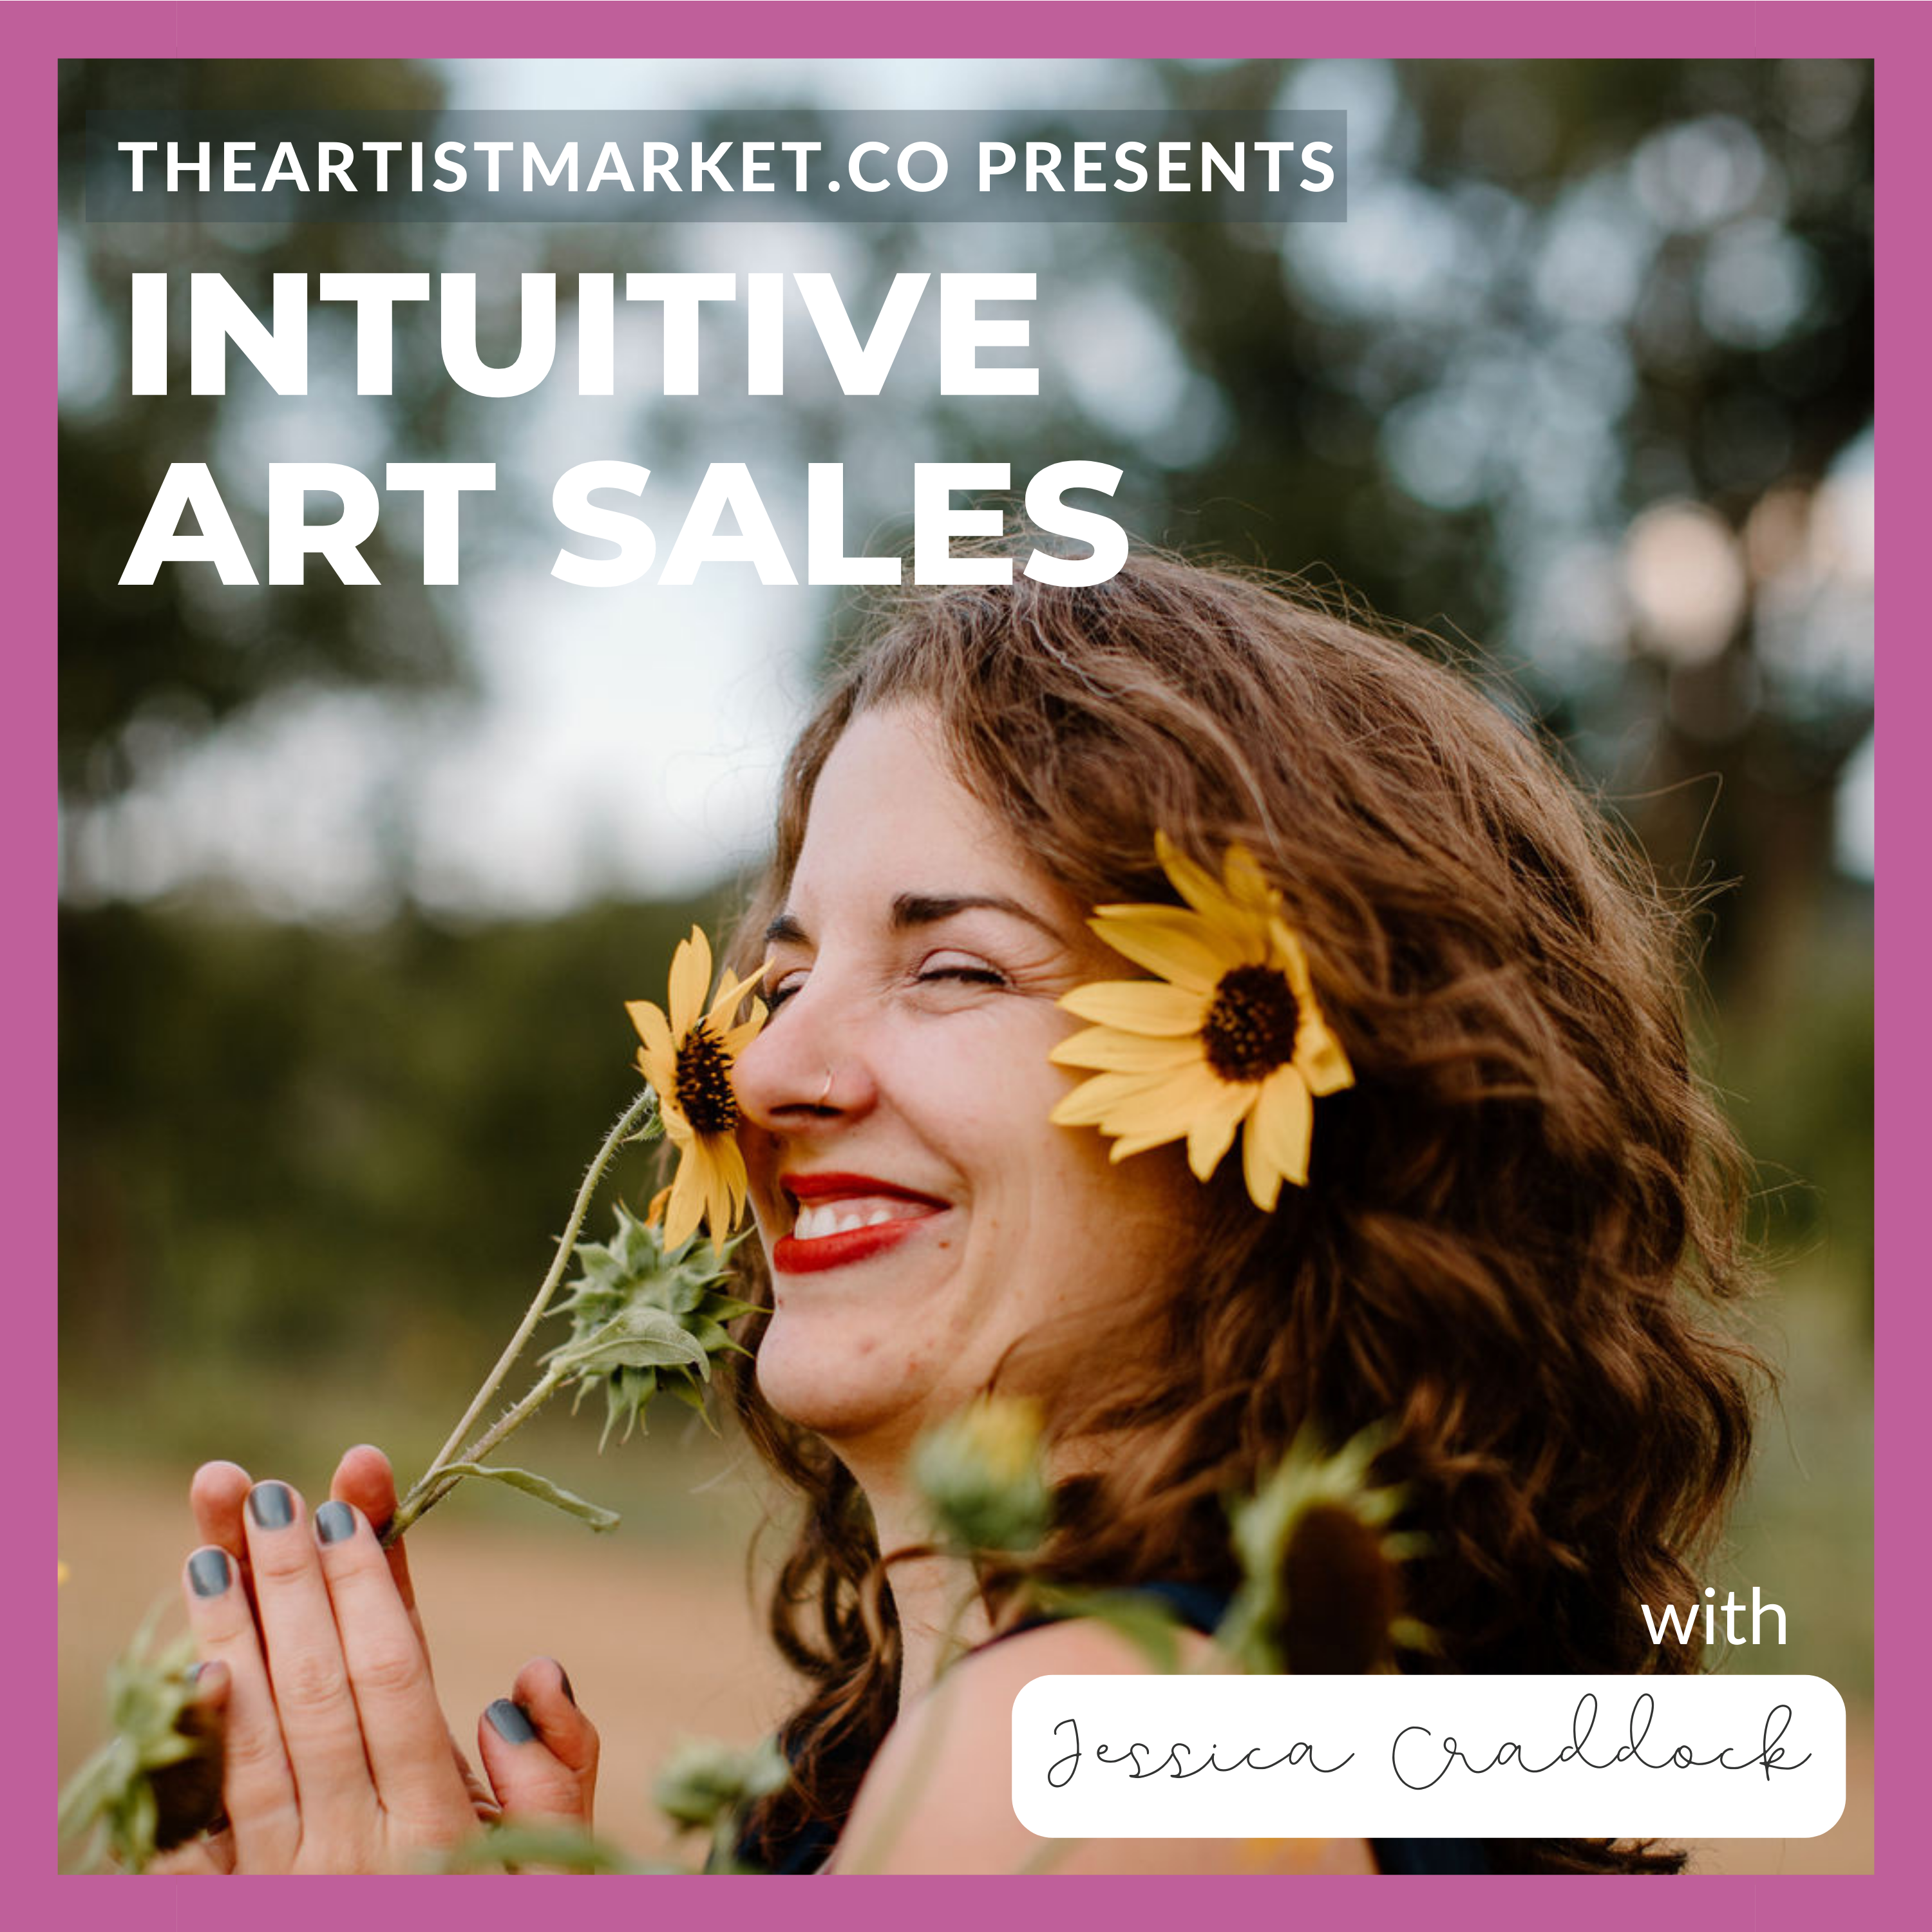 "How can I use local strategies to boost my art business online?" - Heather Freeman E66